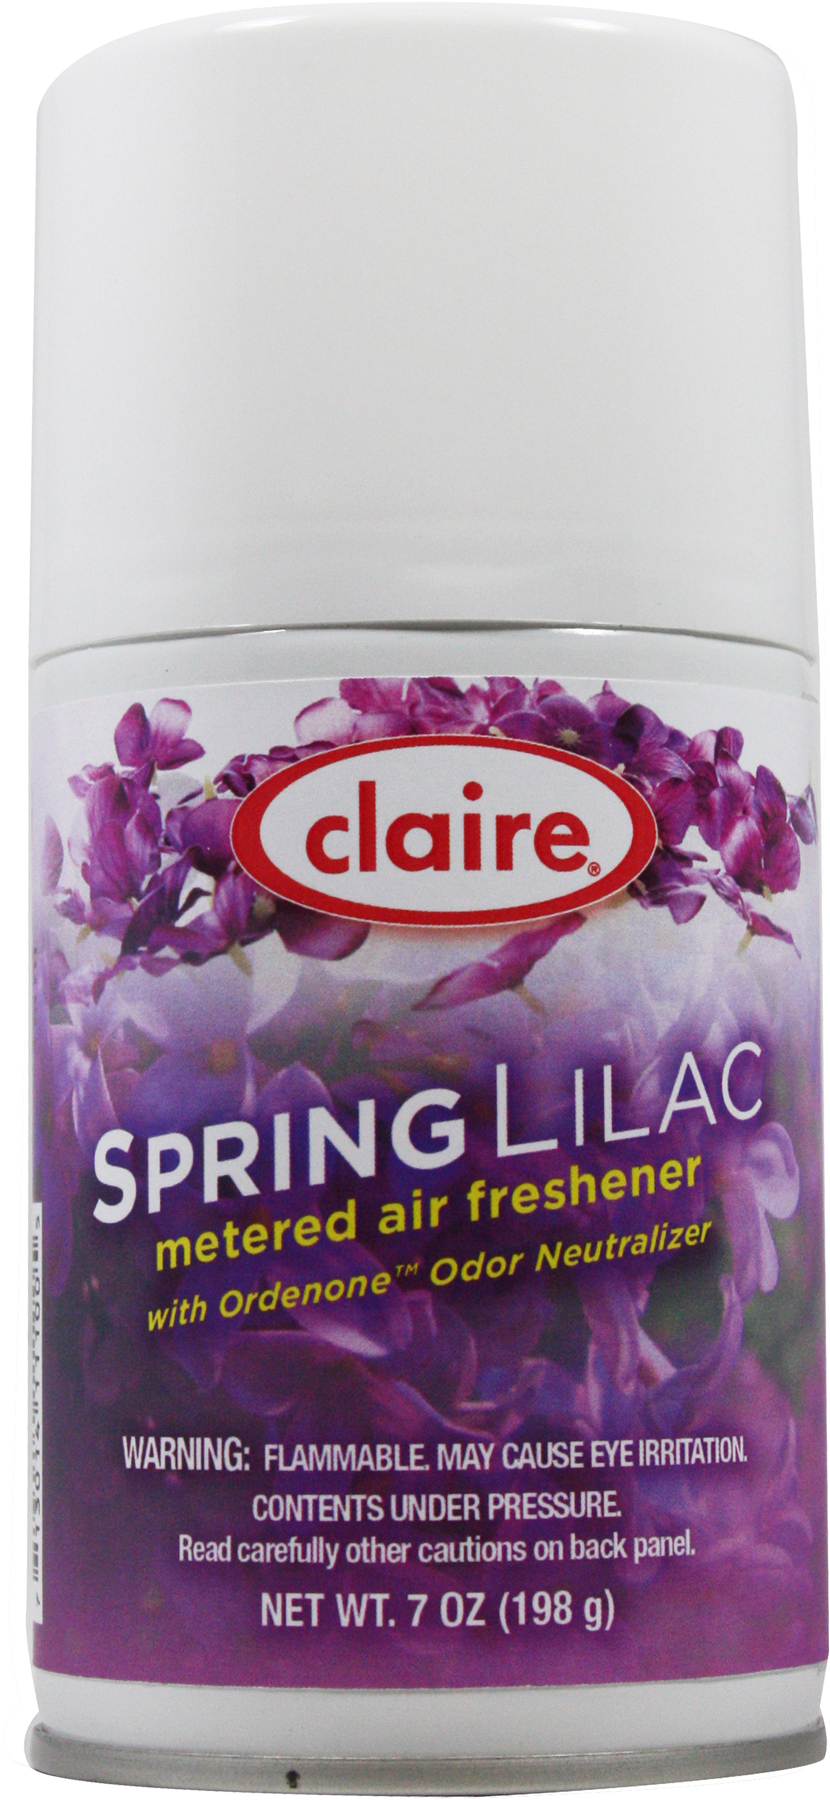 CLAIRE SPRING LILAC METERED REFILL (12/7OZ)